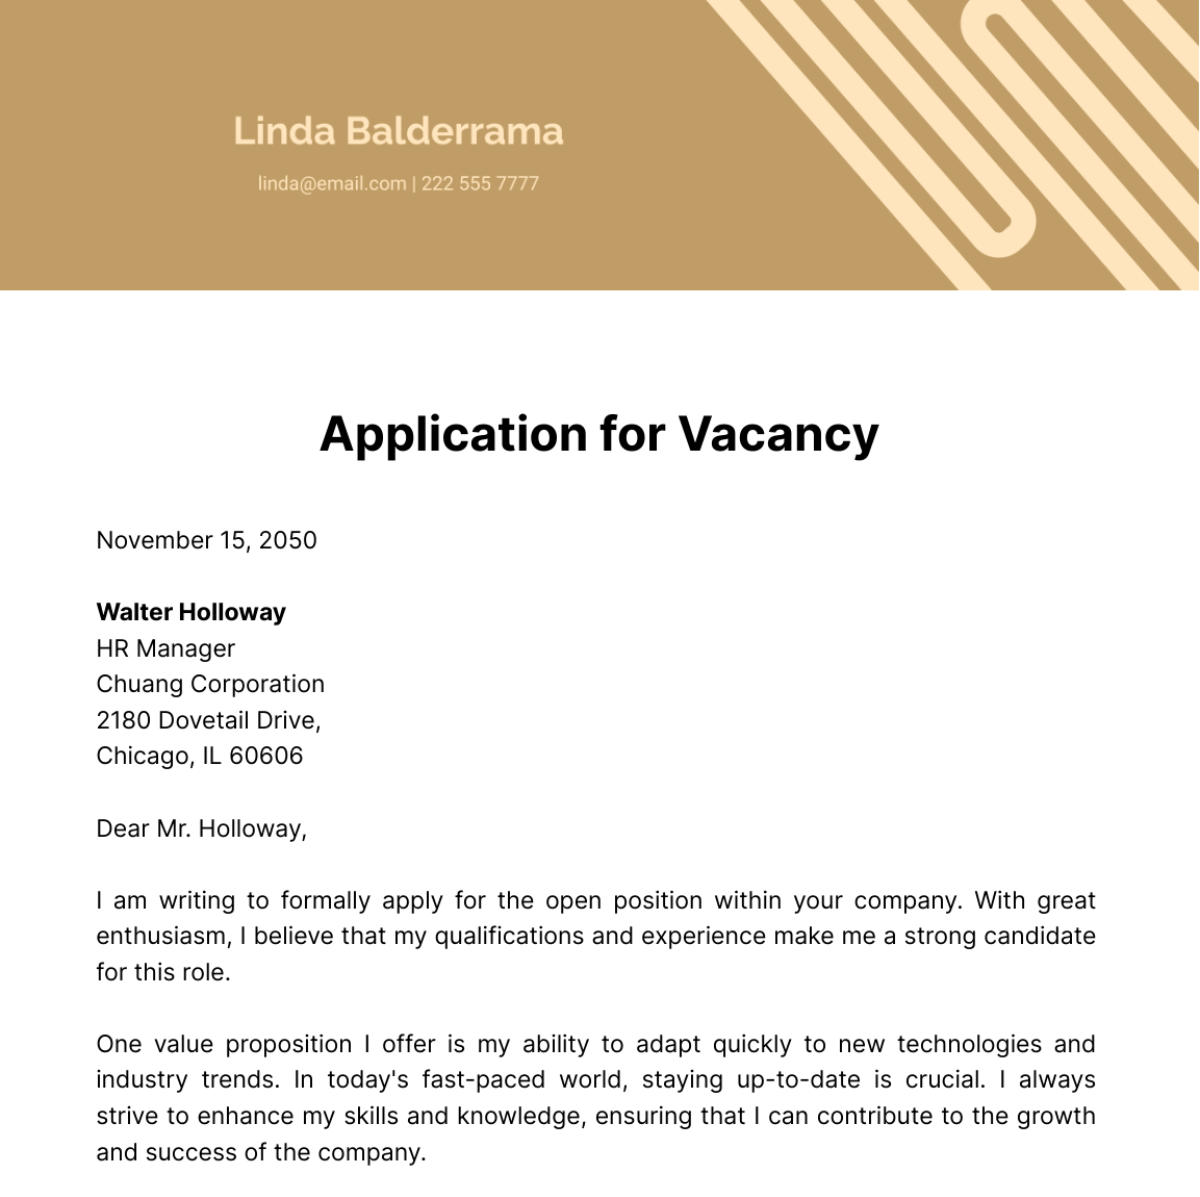 Application Letter for Vacancy  Template